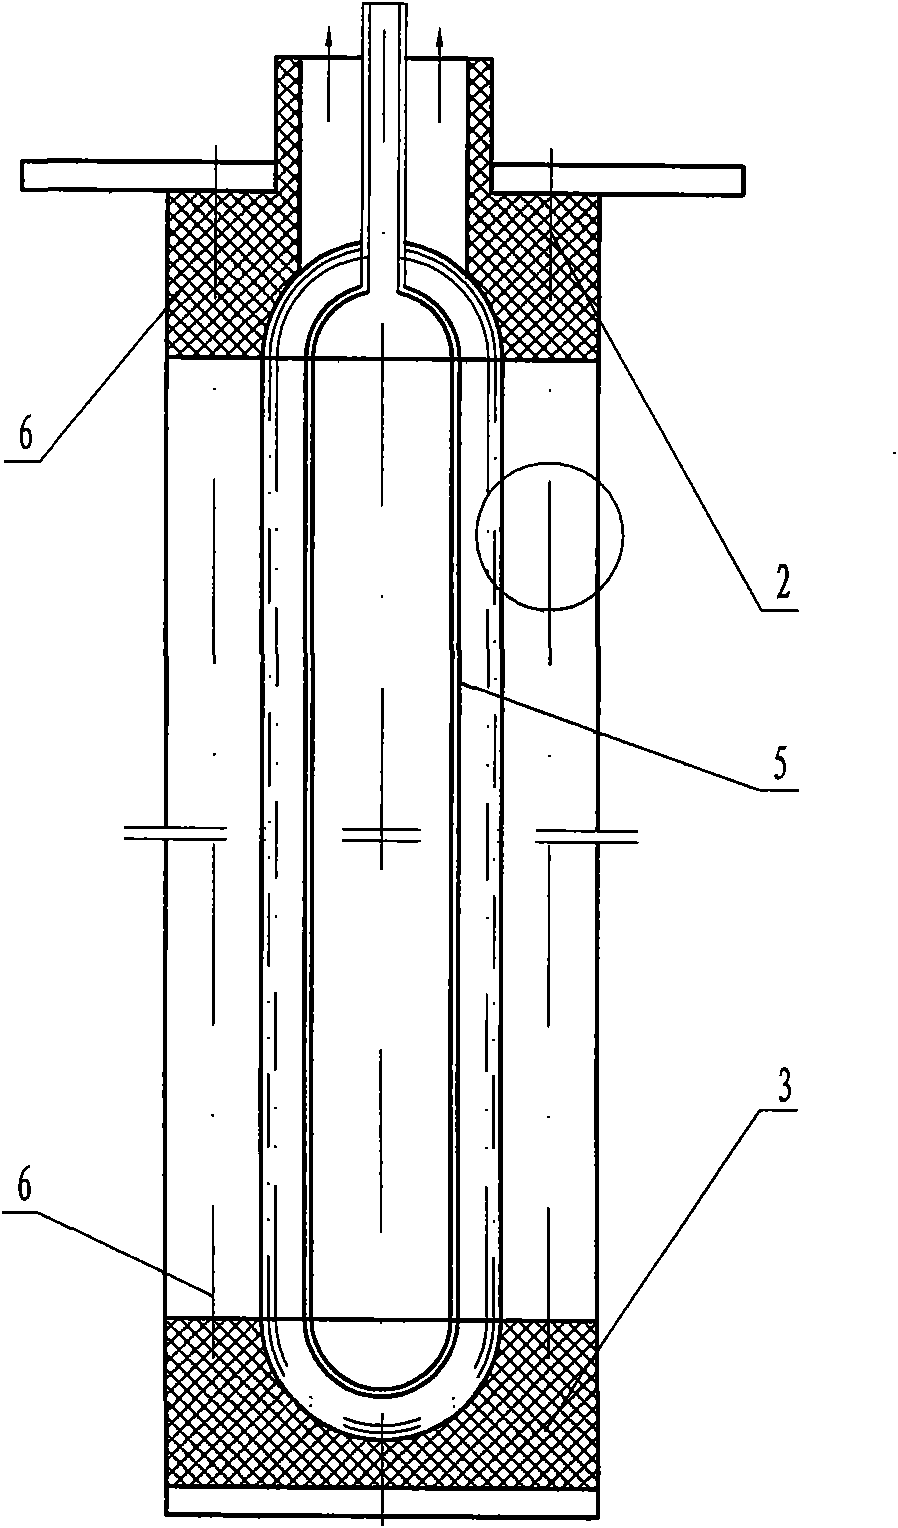 Filter device for sewage treatment